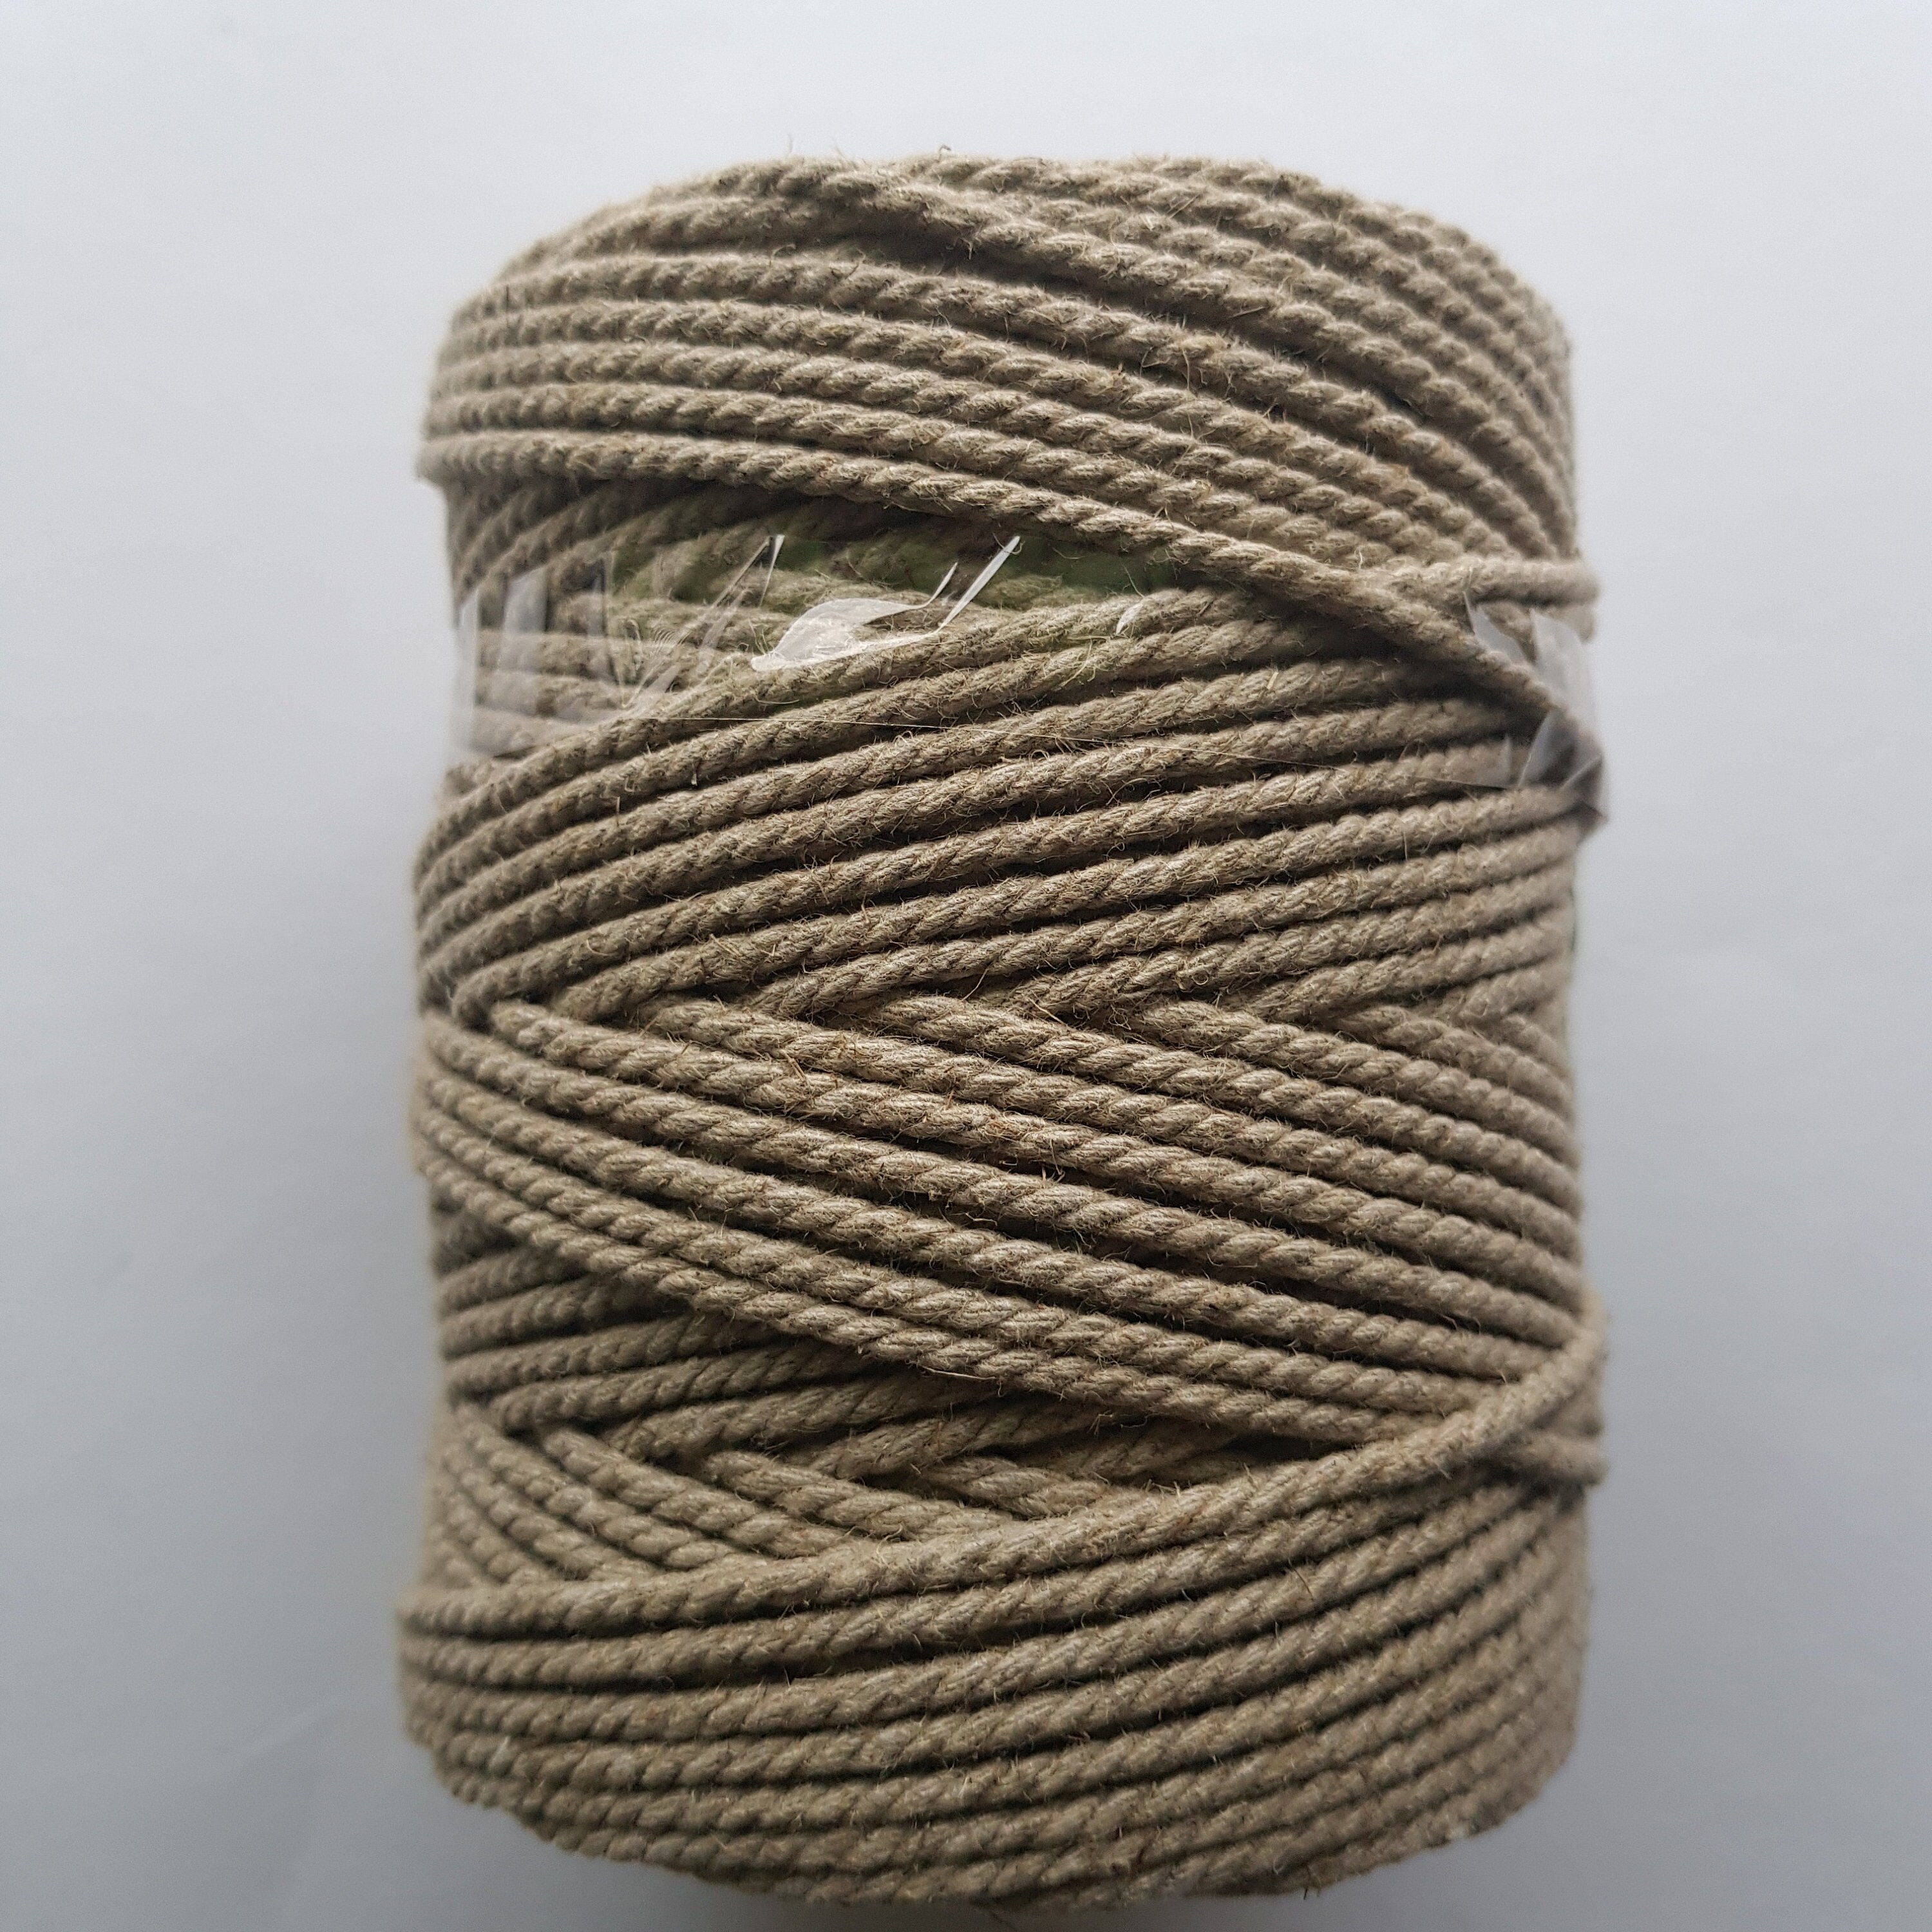 Linen&Cotton Cord 2.5 mm/100 m of High Quality Yarn for Crafts Macrame  Projects